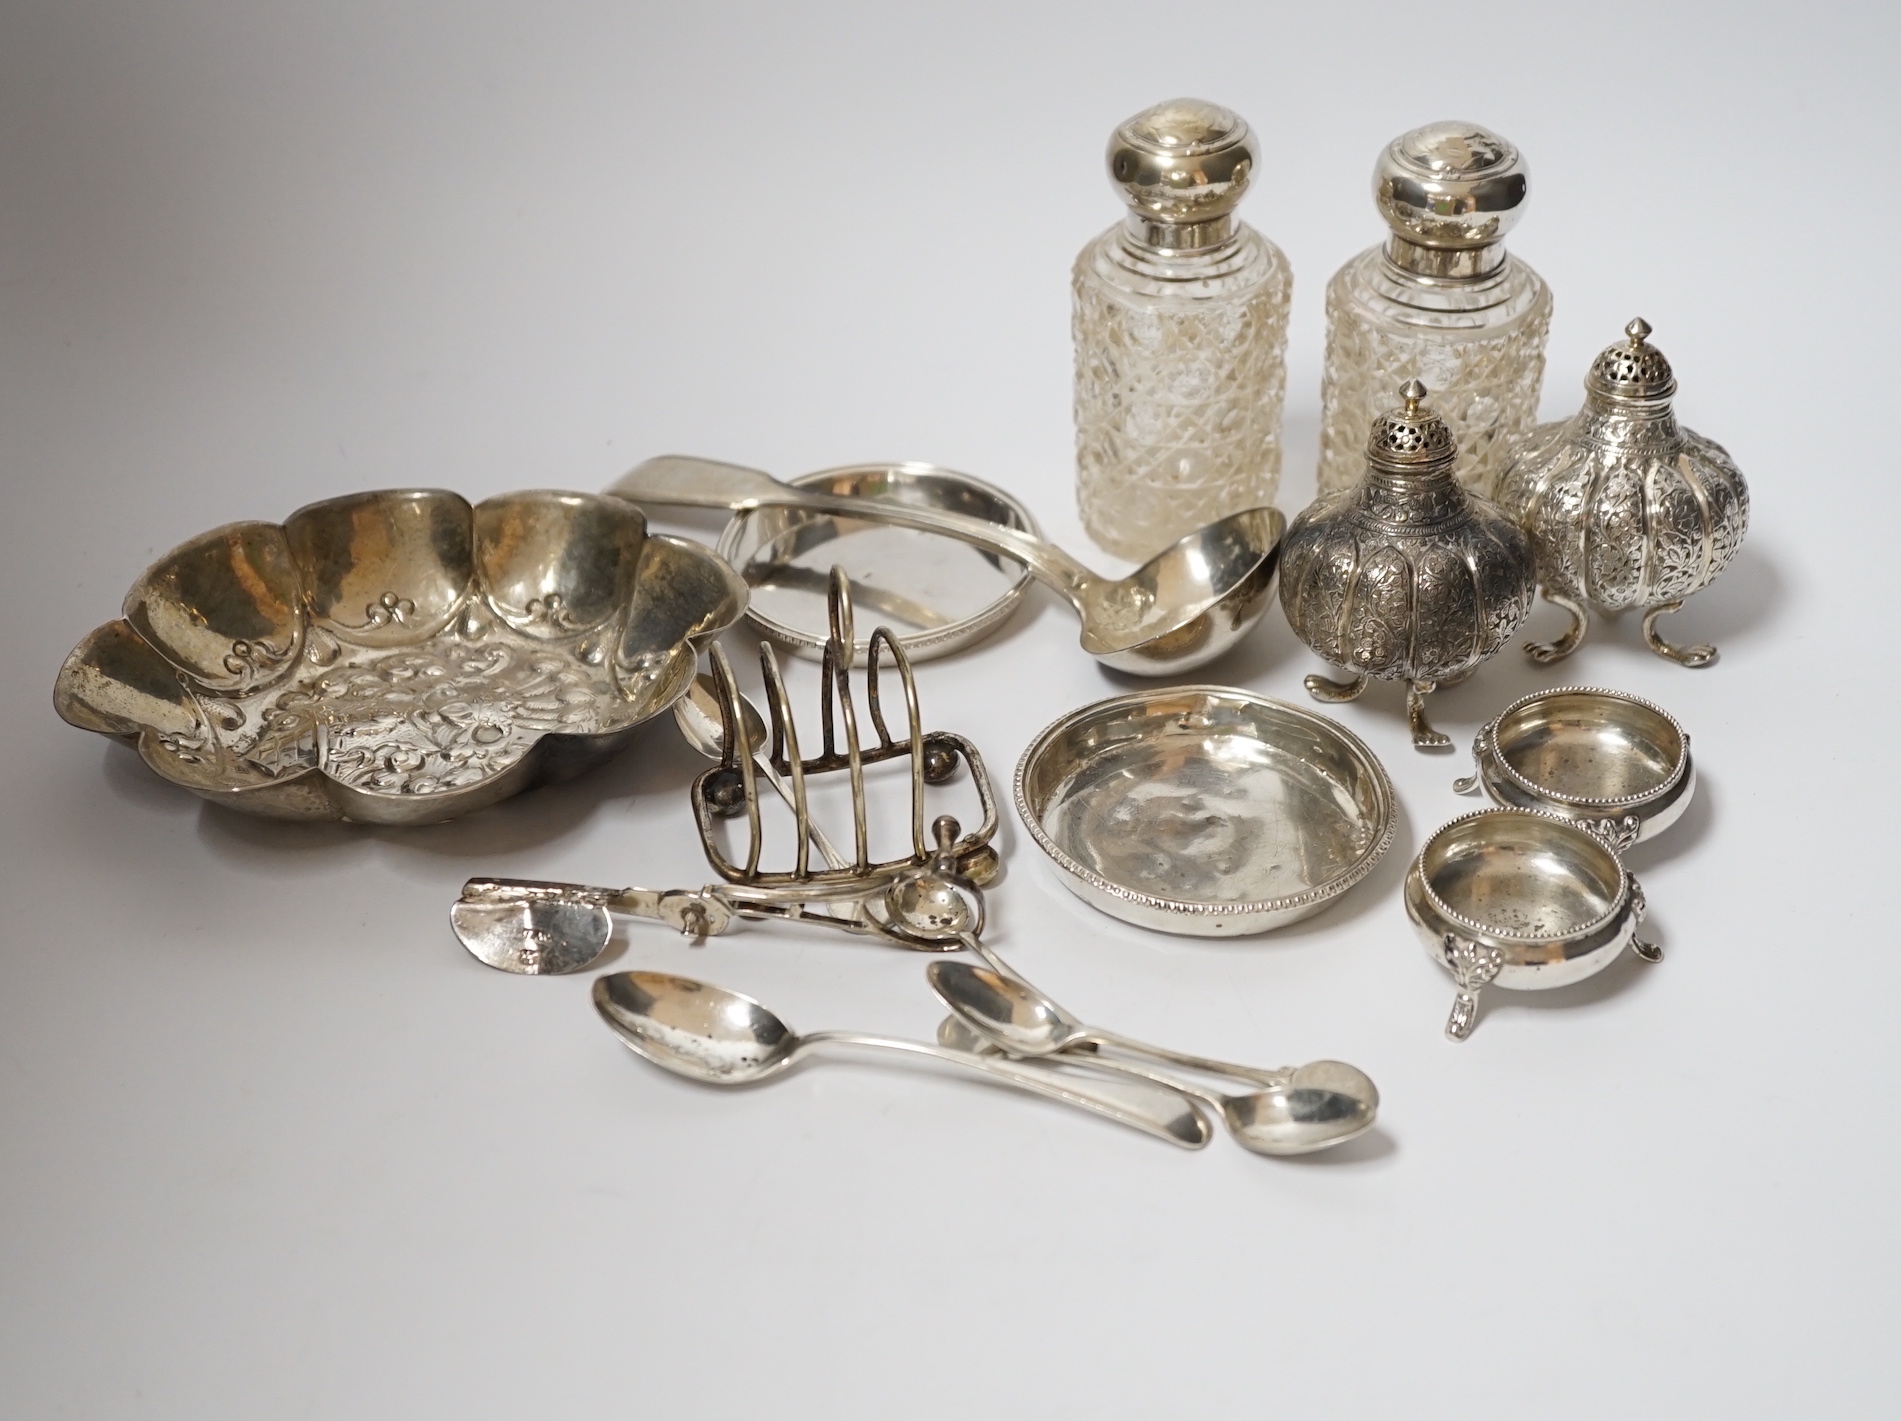 A group of small mainly silver or white metal items, including salts, dishes, flatware, etc.